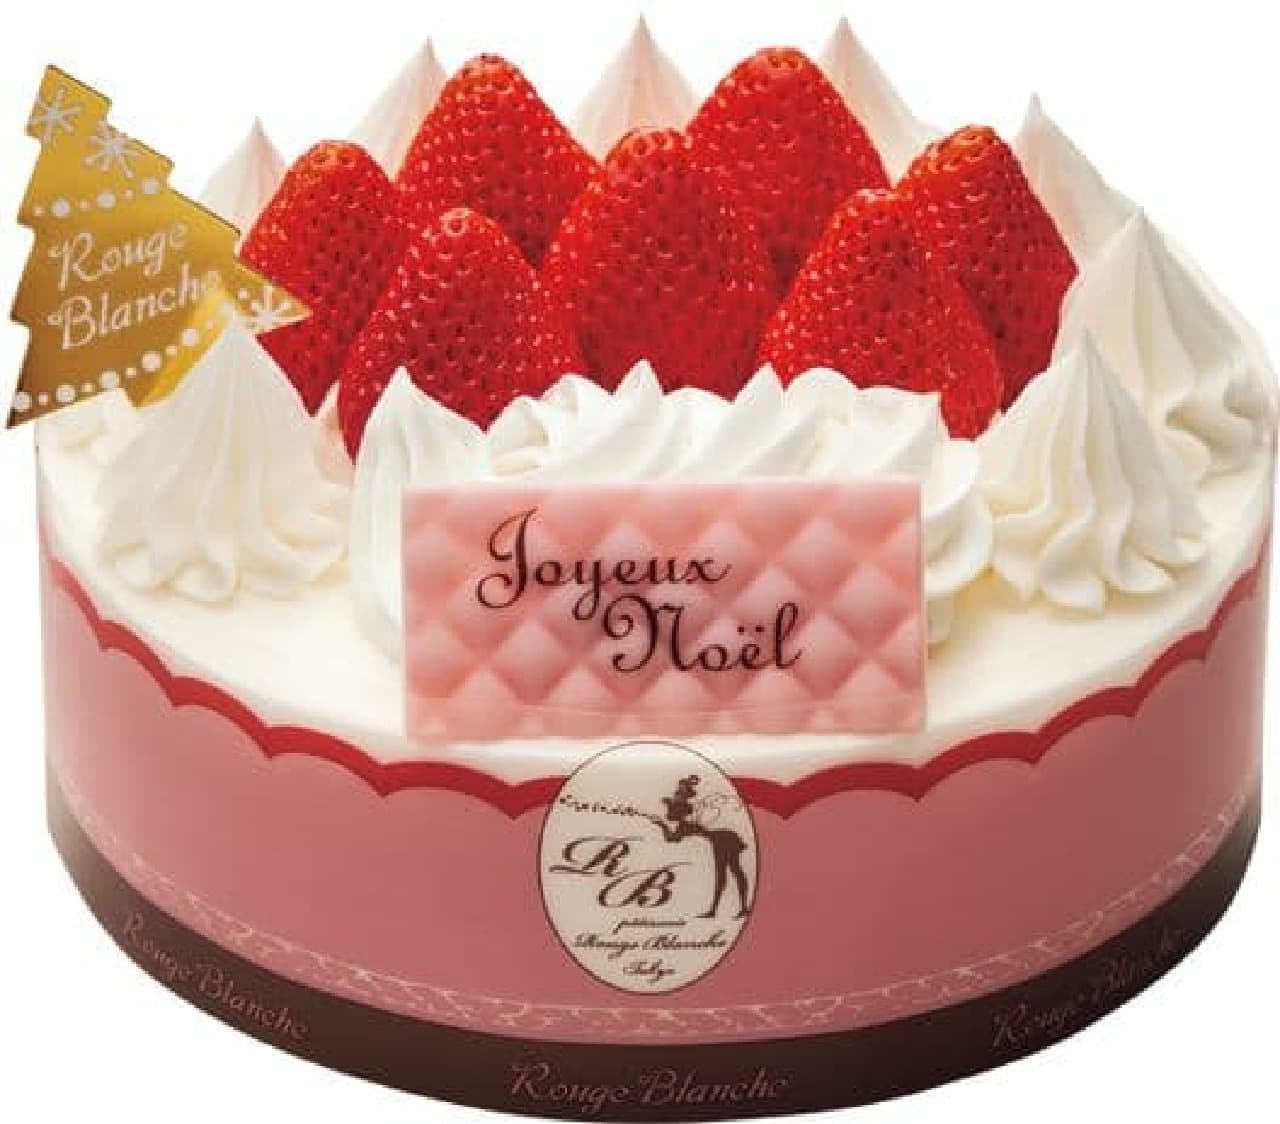 FamilyMart "Gâteau Blanche No. 5 under the supervision of Rouge Blanche